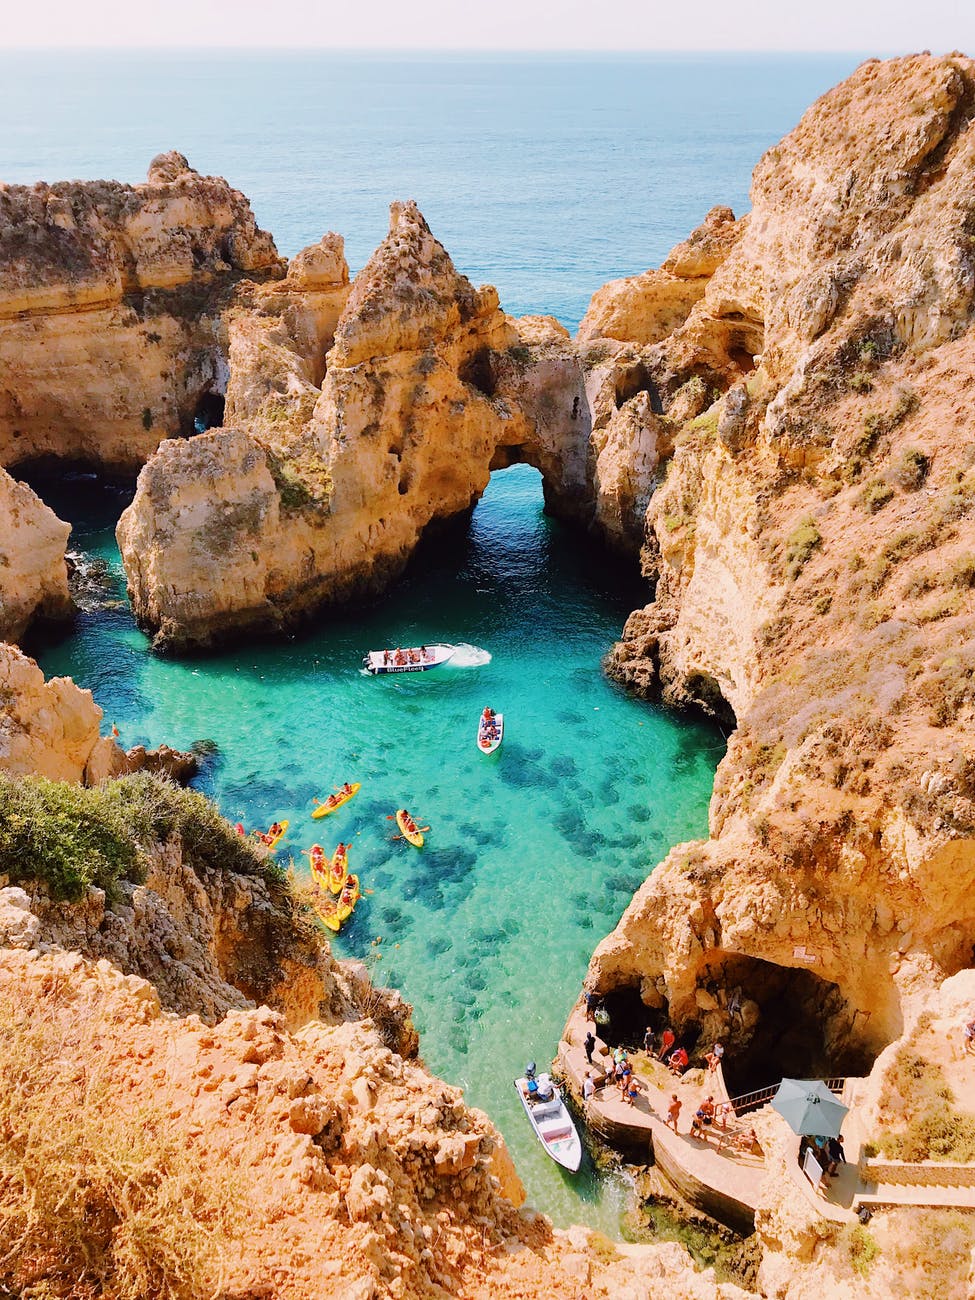 Top 7: Must-See Places in the Algarve Region - About Time Magazine